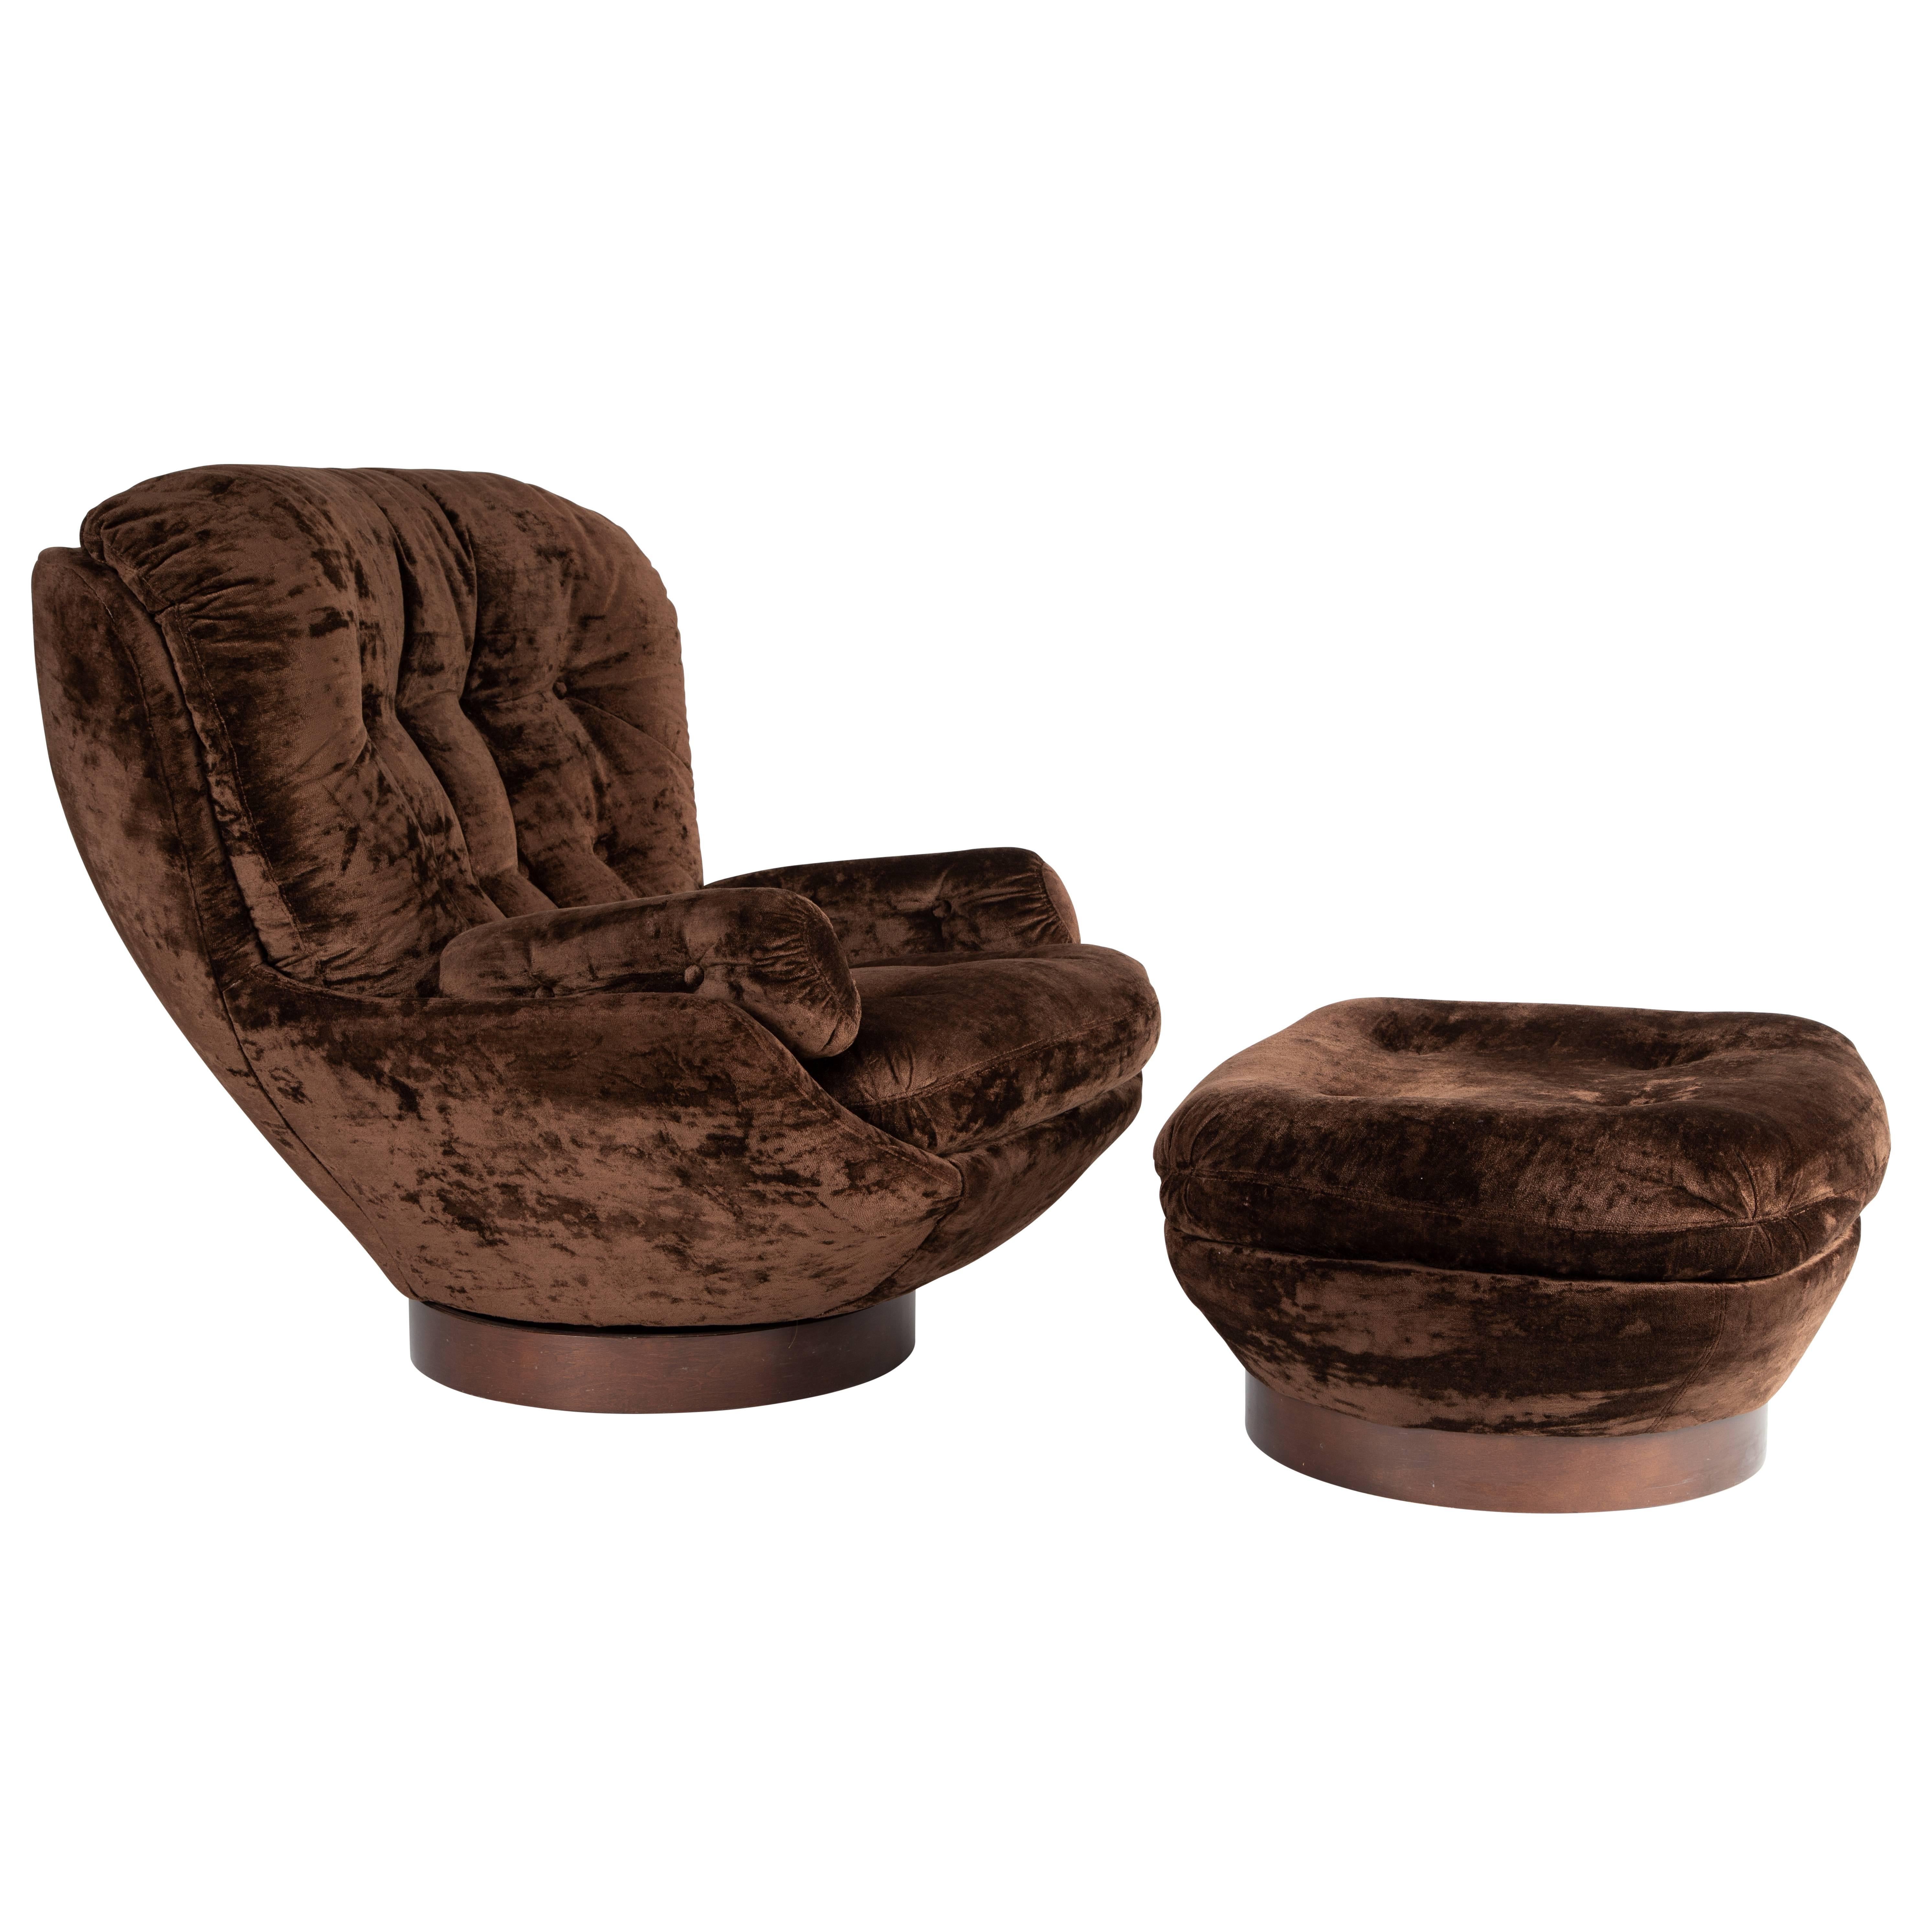 Shapely Selig Lounge Chair and Ottoman, circa 1970s